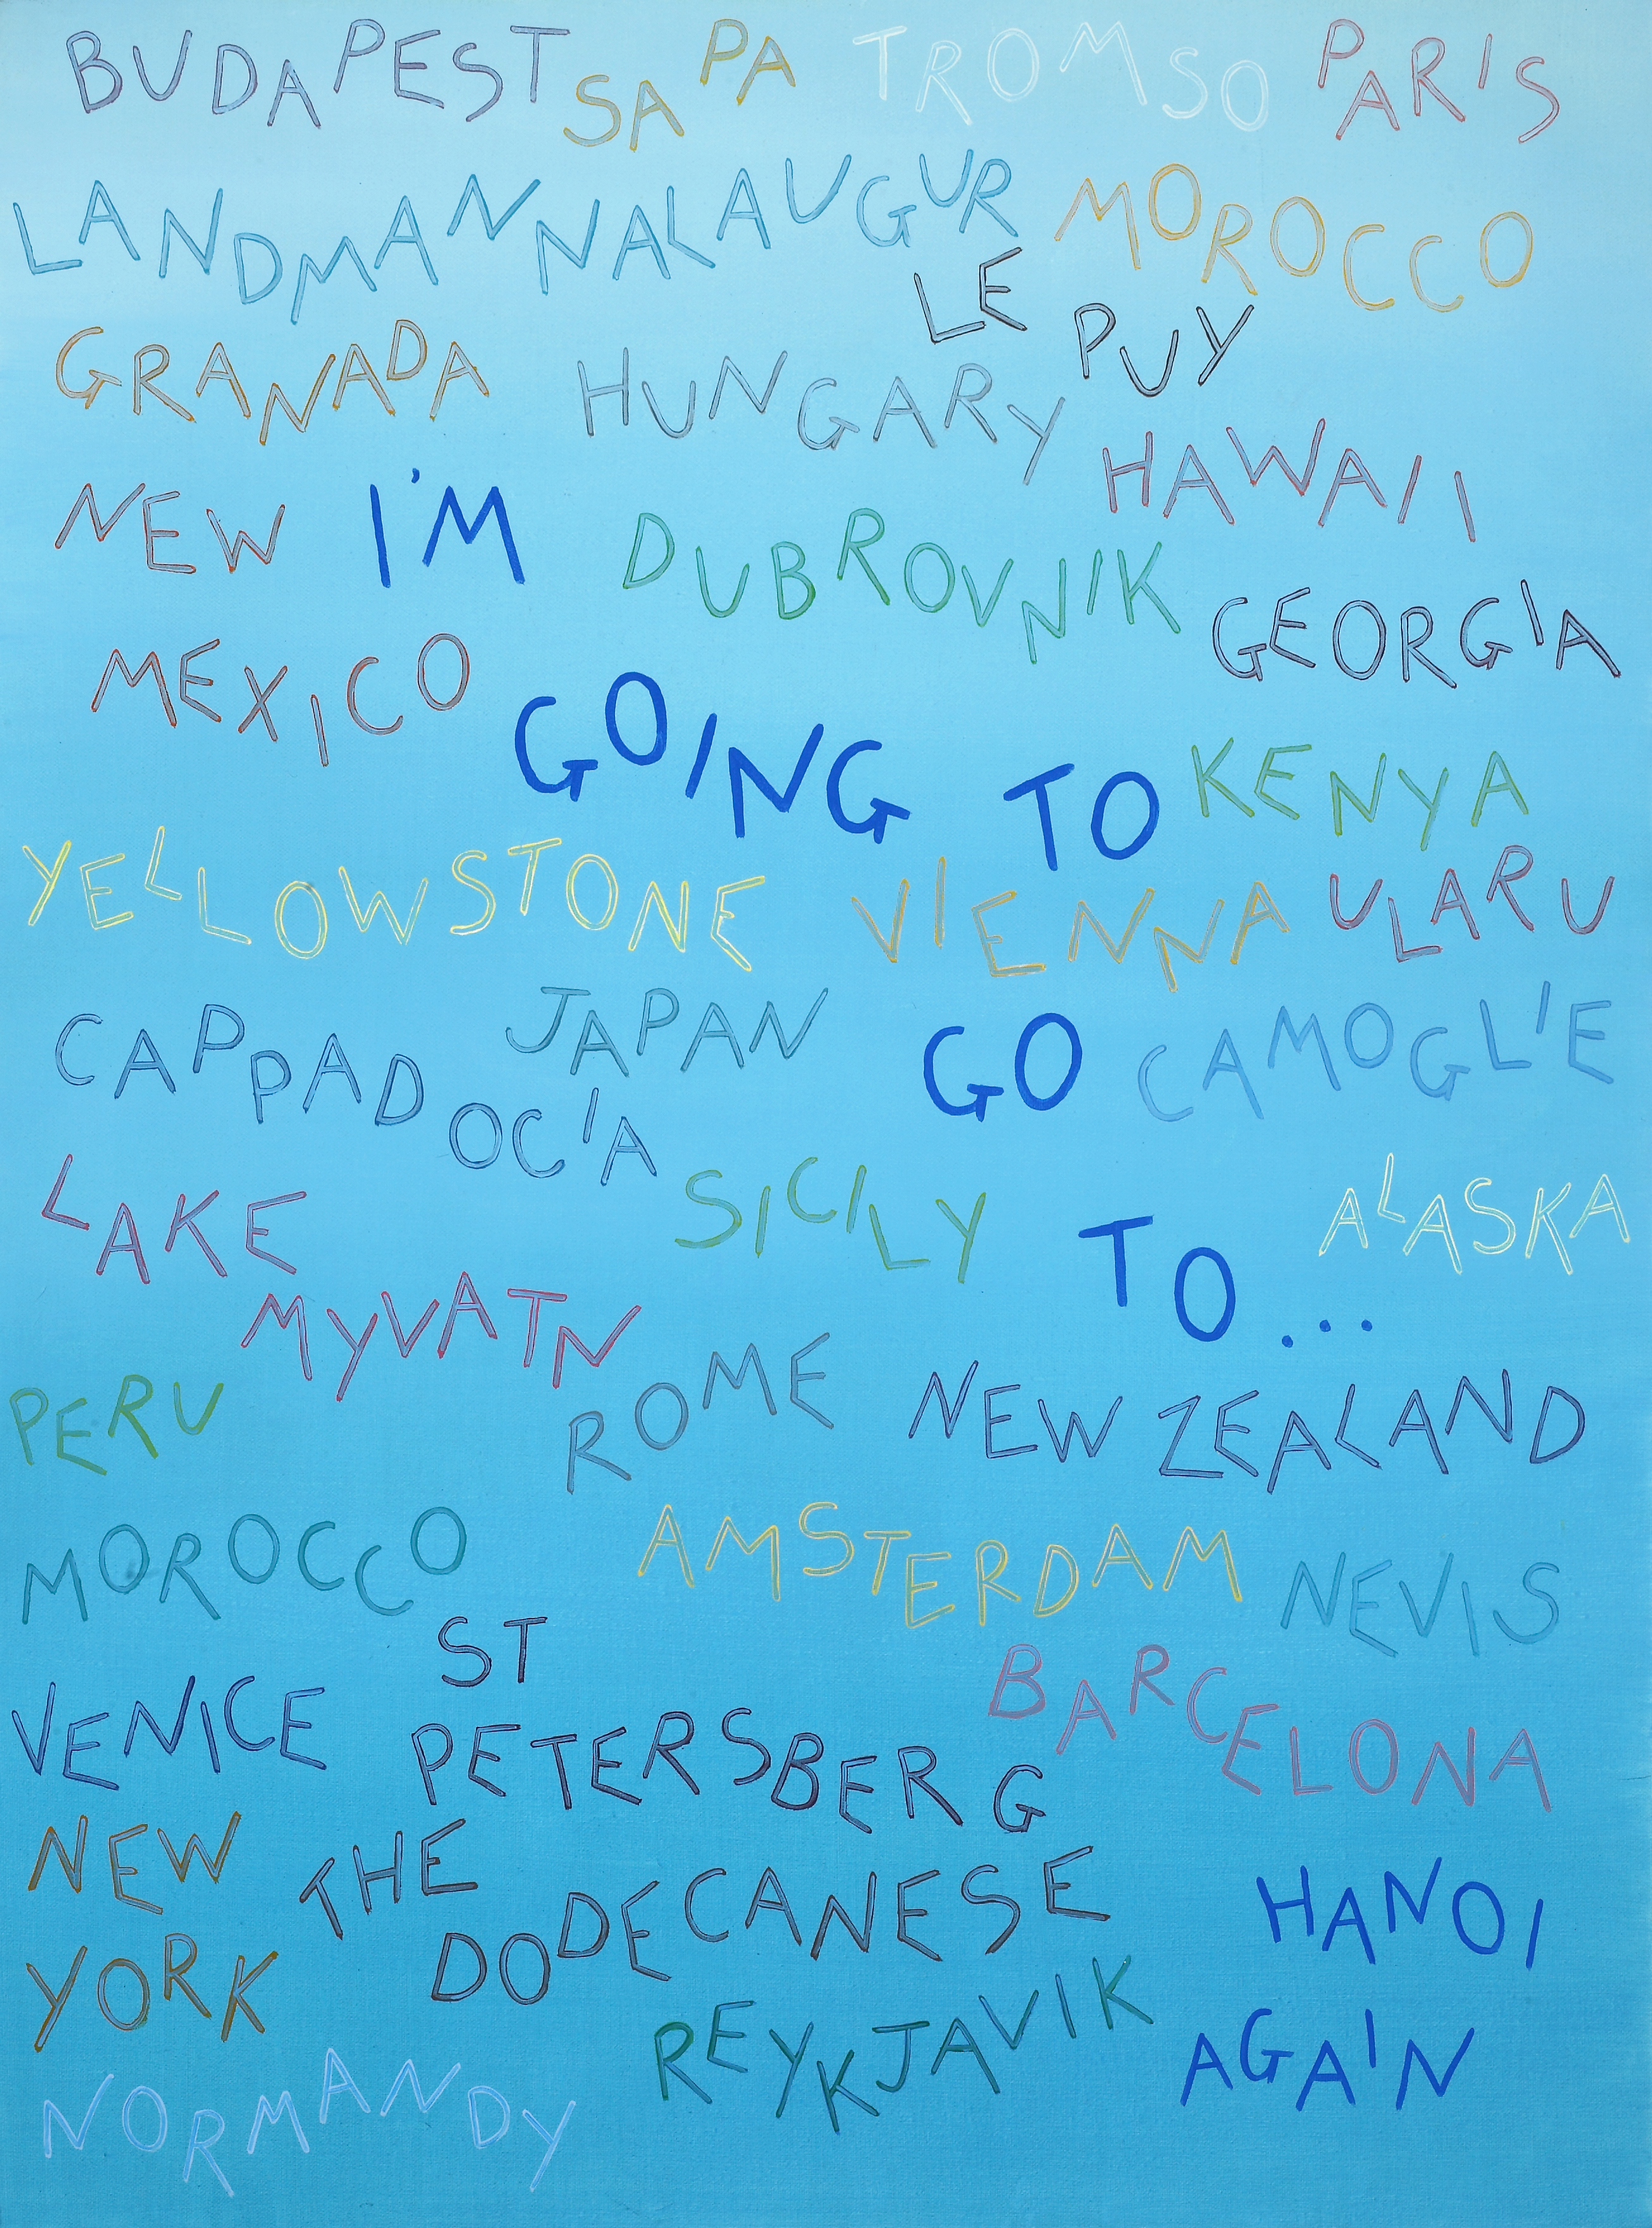 Rachel McDonnell , I'm Going to Go To, The Auction Collective